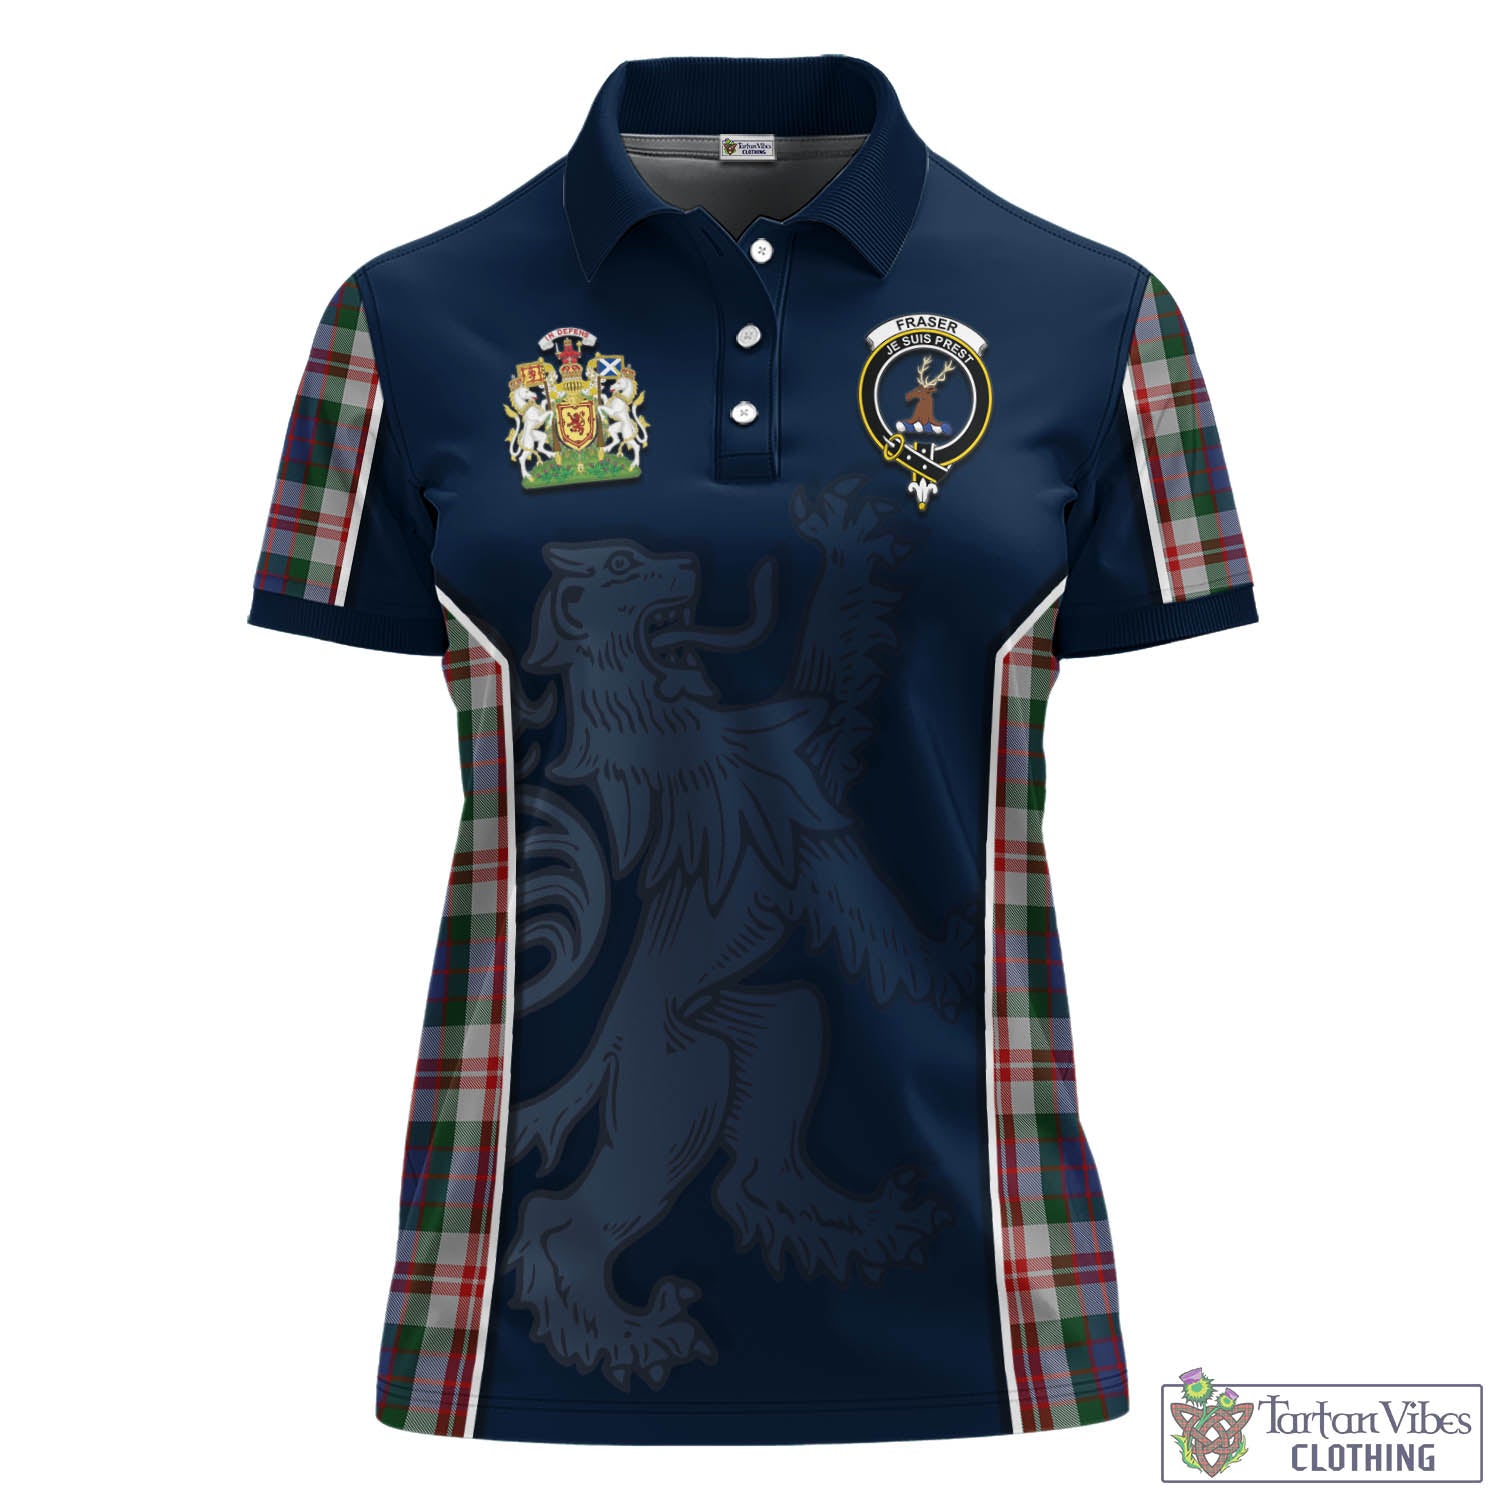 Tartan Vibes Clothing Fraser Red Dress Tartan Women's Polo Shirt with Family Crest and Lion Rampant Vibes Sport Style